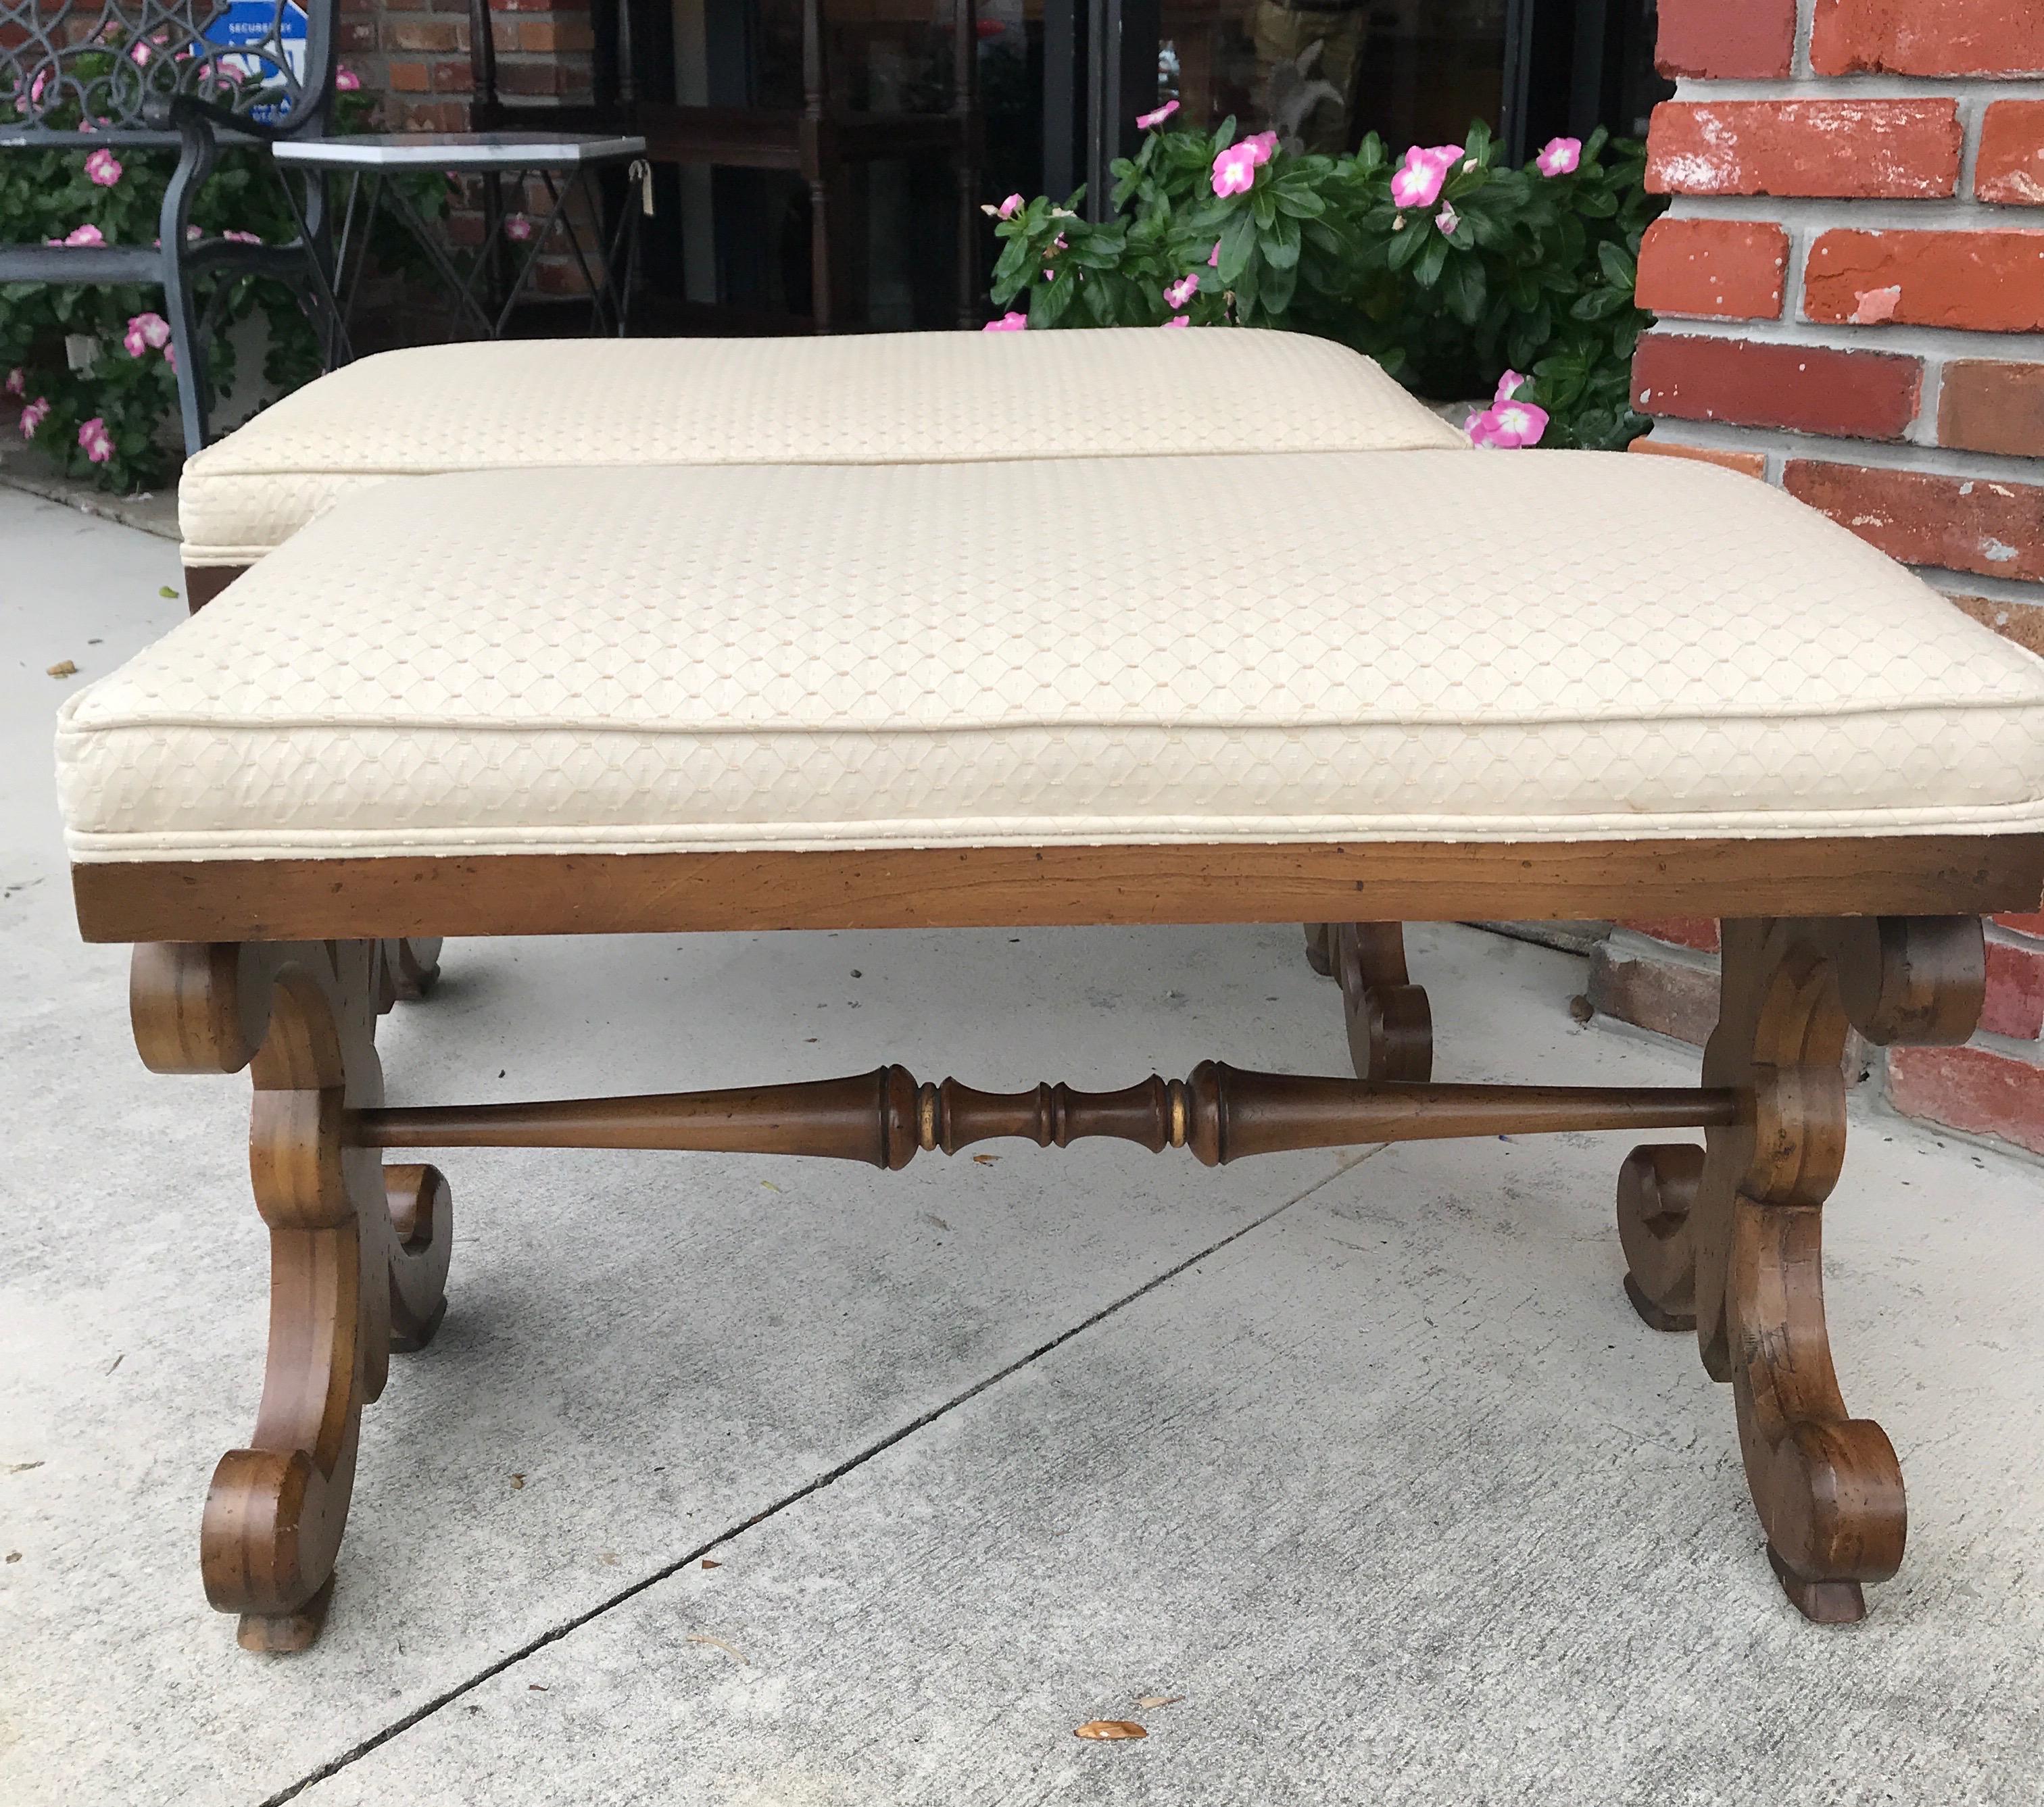 Pair of midcentury wood benches with fleur de lys style sides. Faint gilt detail
to outline. Box cushion in a bone color fabric.